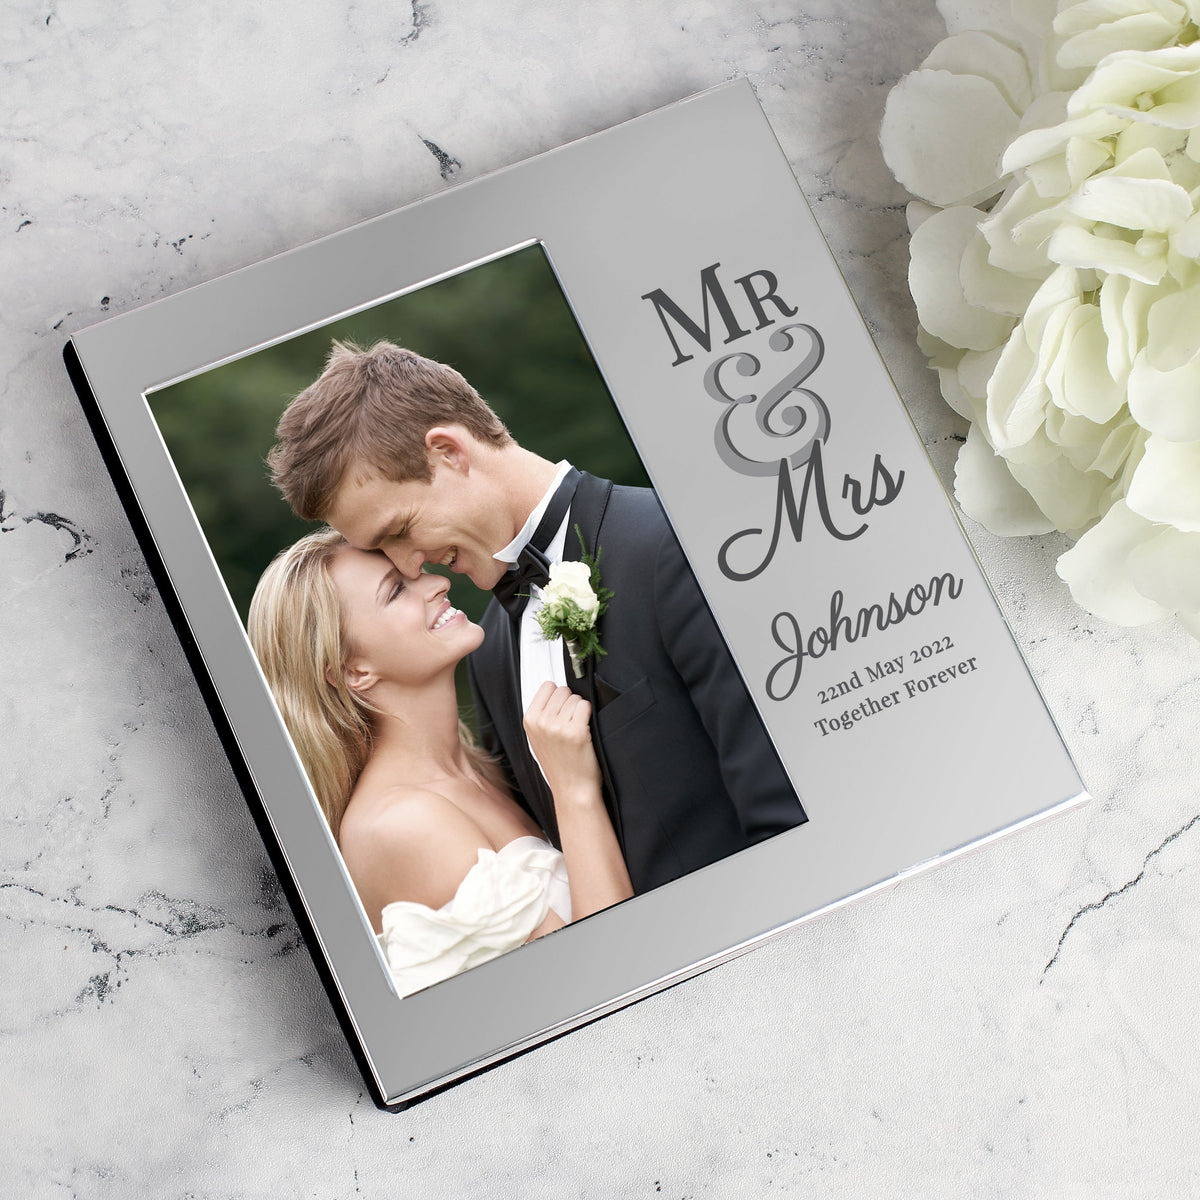 Personalised Floral 6x4 Photo Album with Sleeves